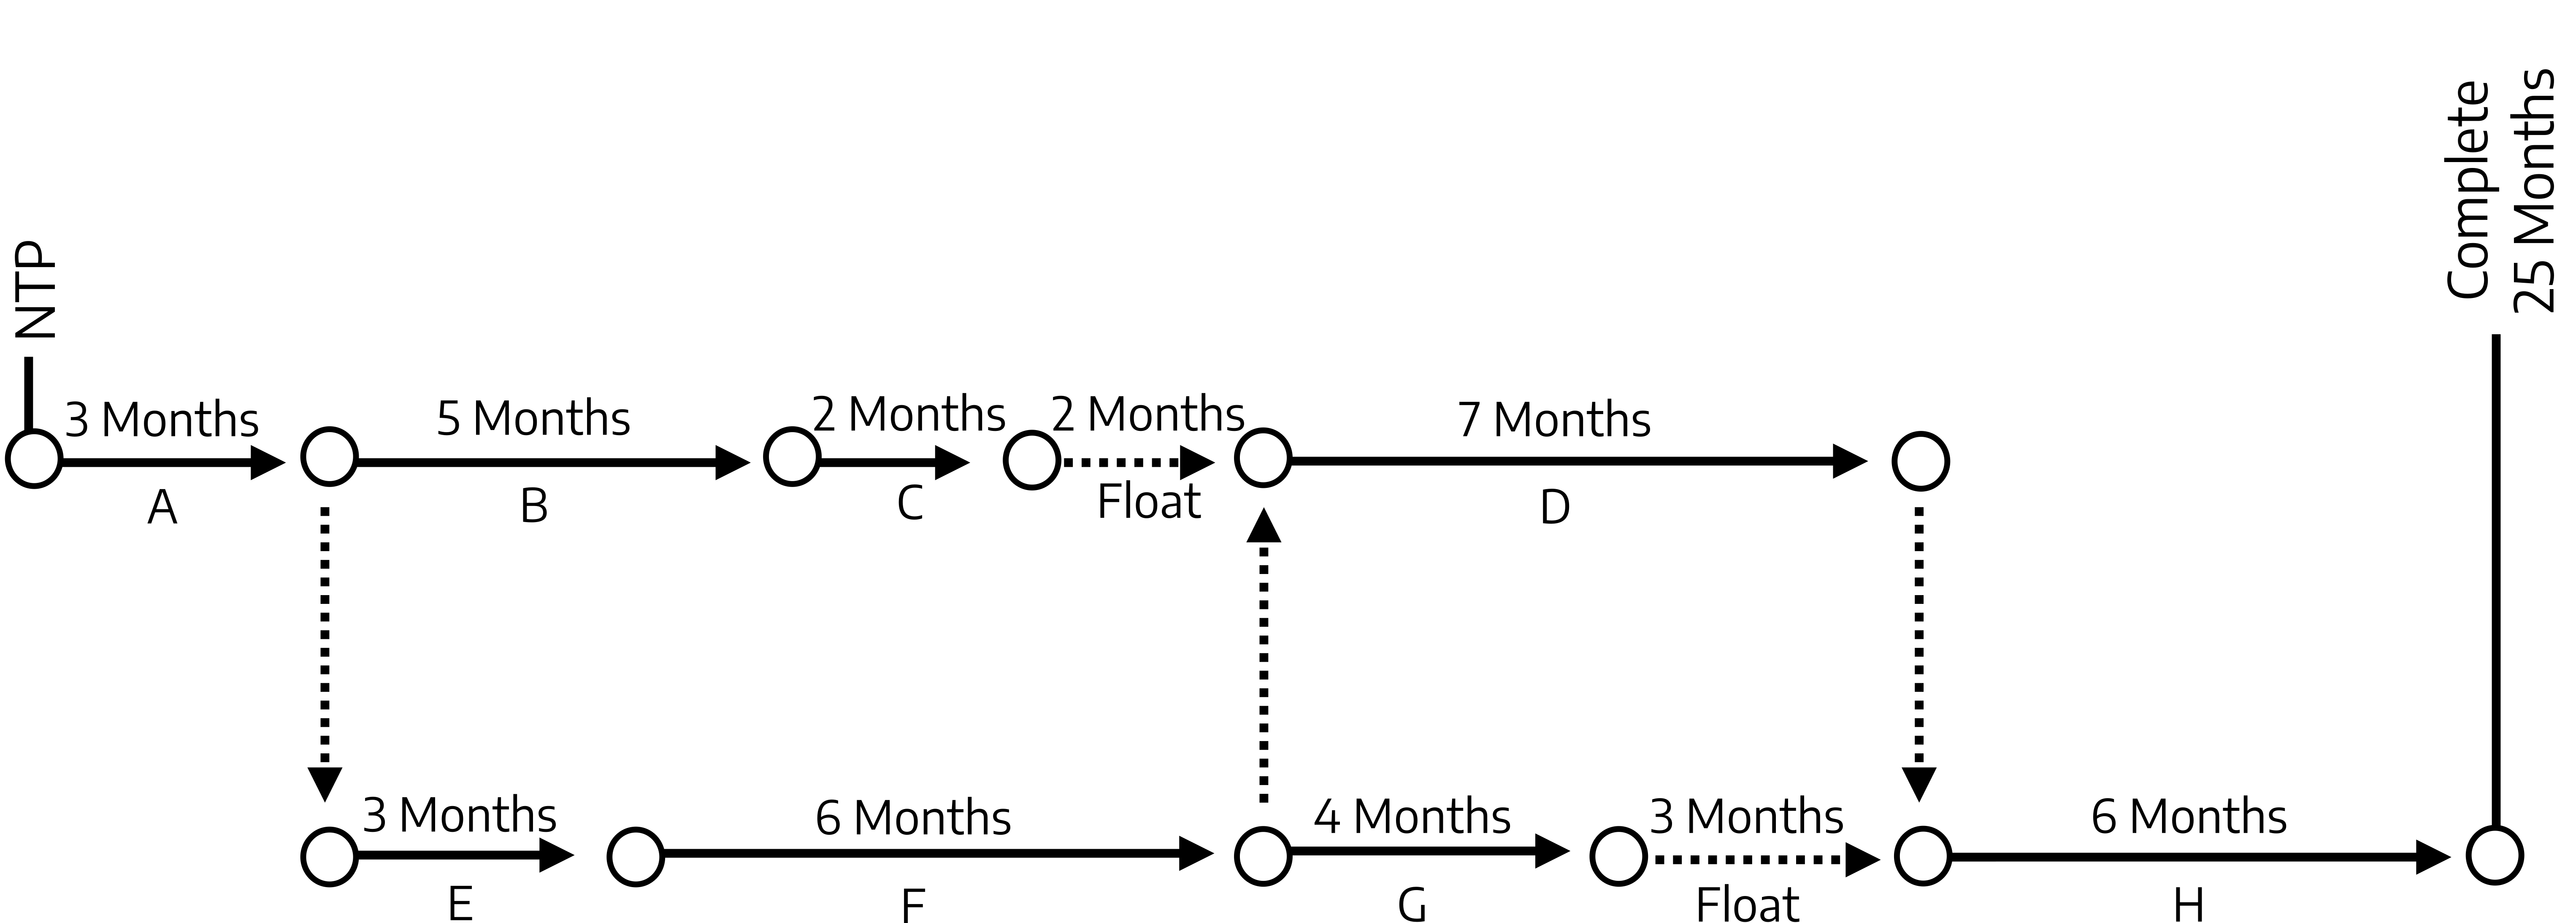 Schedule network with letters associated with timelines, connected by arrows. A, B, C, and D are in a straight line at the top. E, F, G, and H are in a straight line underneath. B connects to E with a dotted arrow. G connects to D with a dotted arrow. D connects to Float with a dotted arrow. Start: NTP. Top: A (3 months) solid right arrow to B (5 months) solid right arrow to C (2 months) dotted right arrow to Float (2 months) solid right arrow to D (7 months). Bottom: E (3 months) solid right arrow to F (6 months) solid right arrow to G (4 months) dotted right arrow to Float (3 months) solid right arrow to H (6 months) solid right arrow to Complete (25 months).